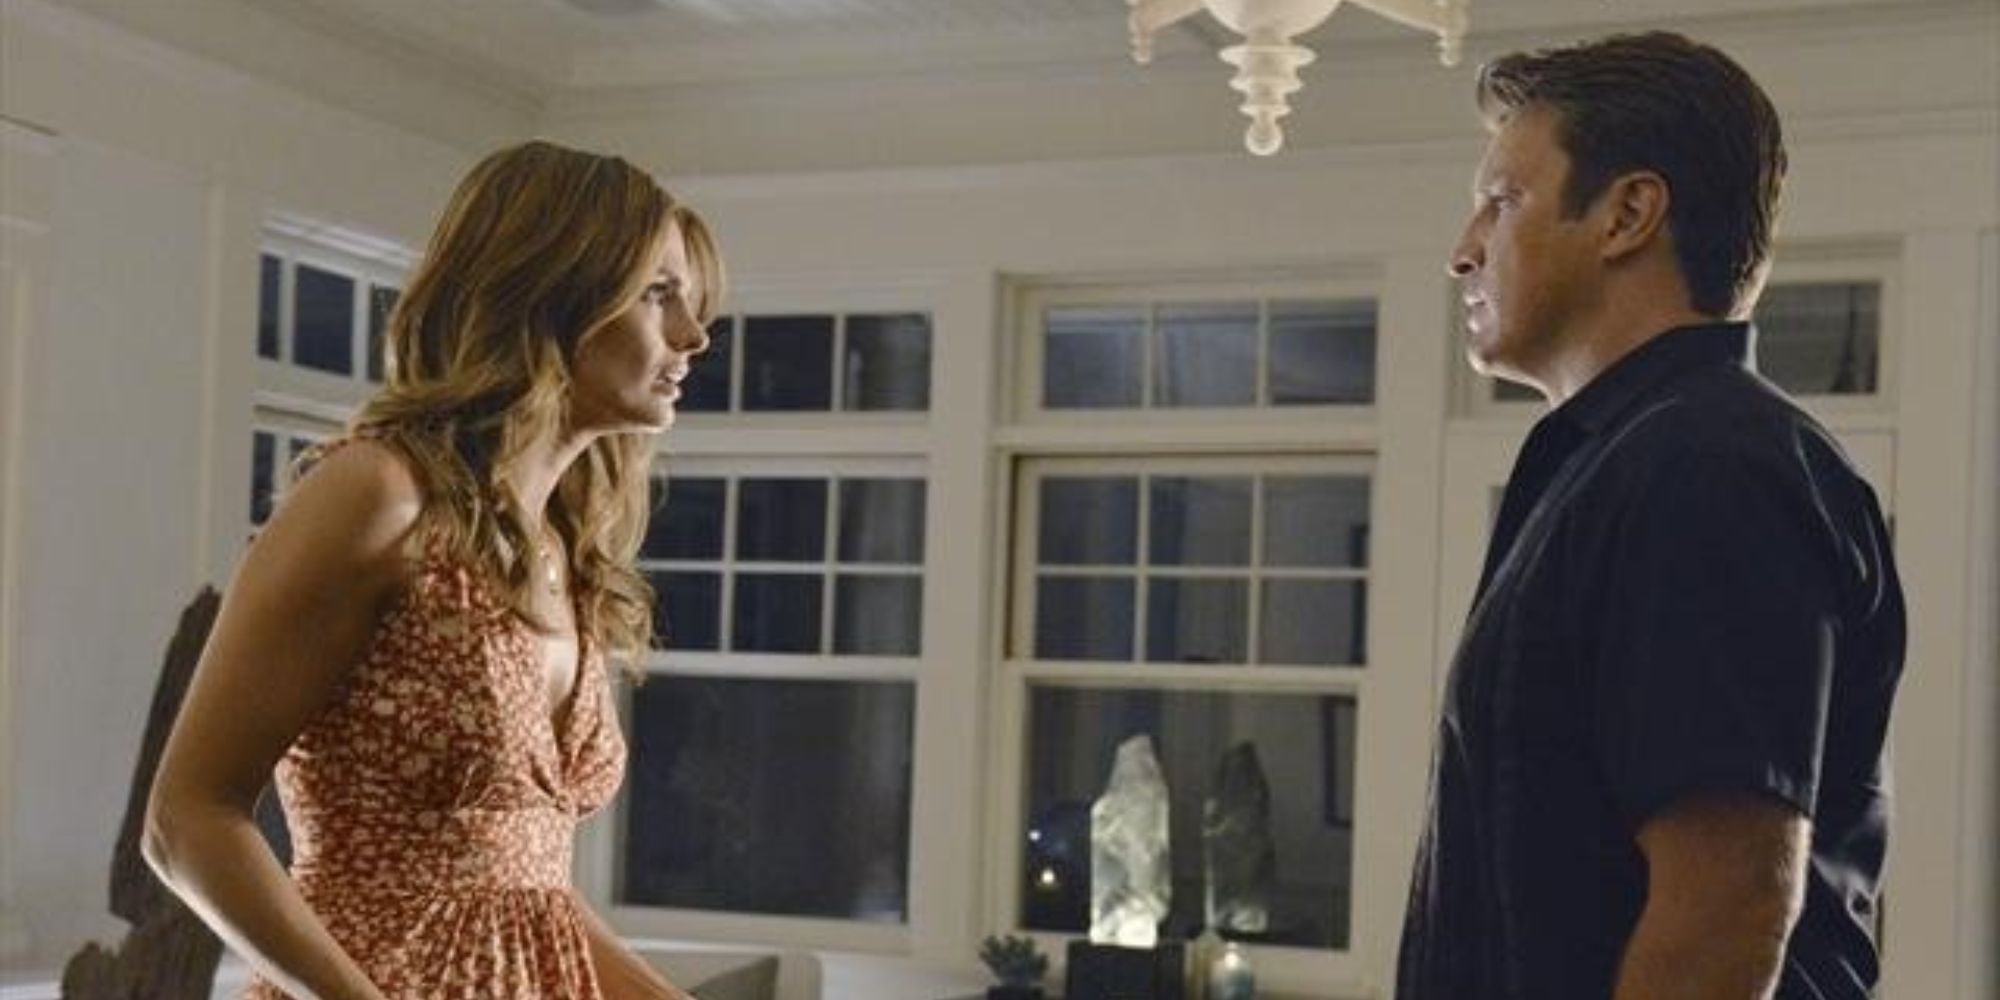 Castle and Beckett talk in the kitchen of Castle's house in the Hamptons